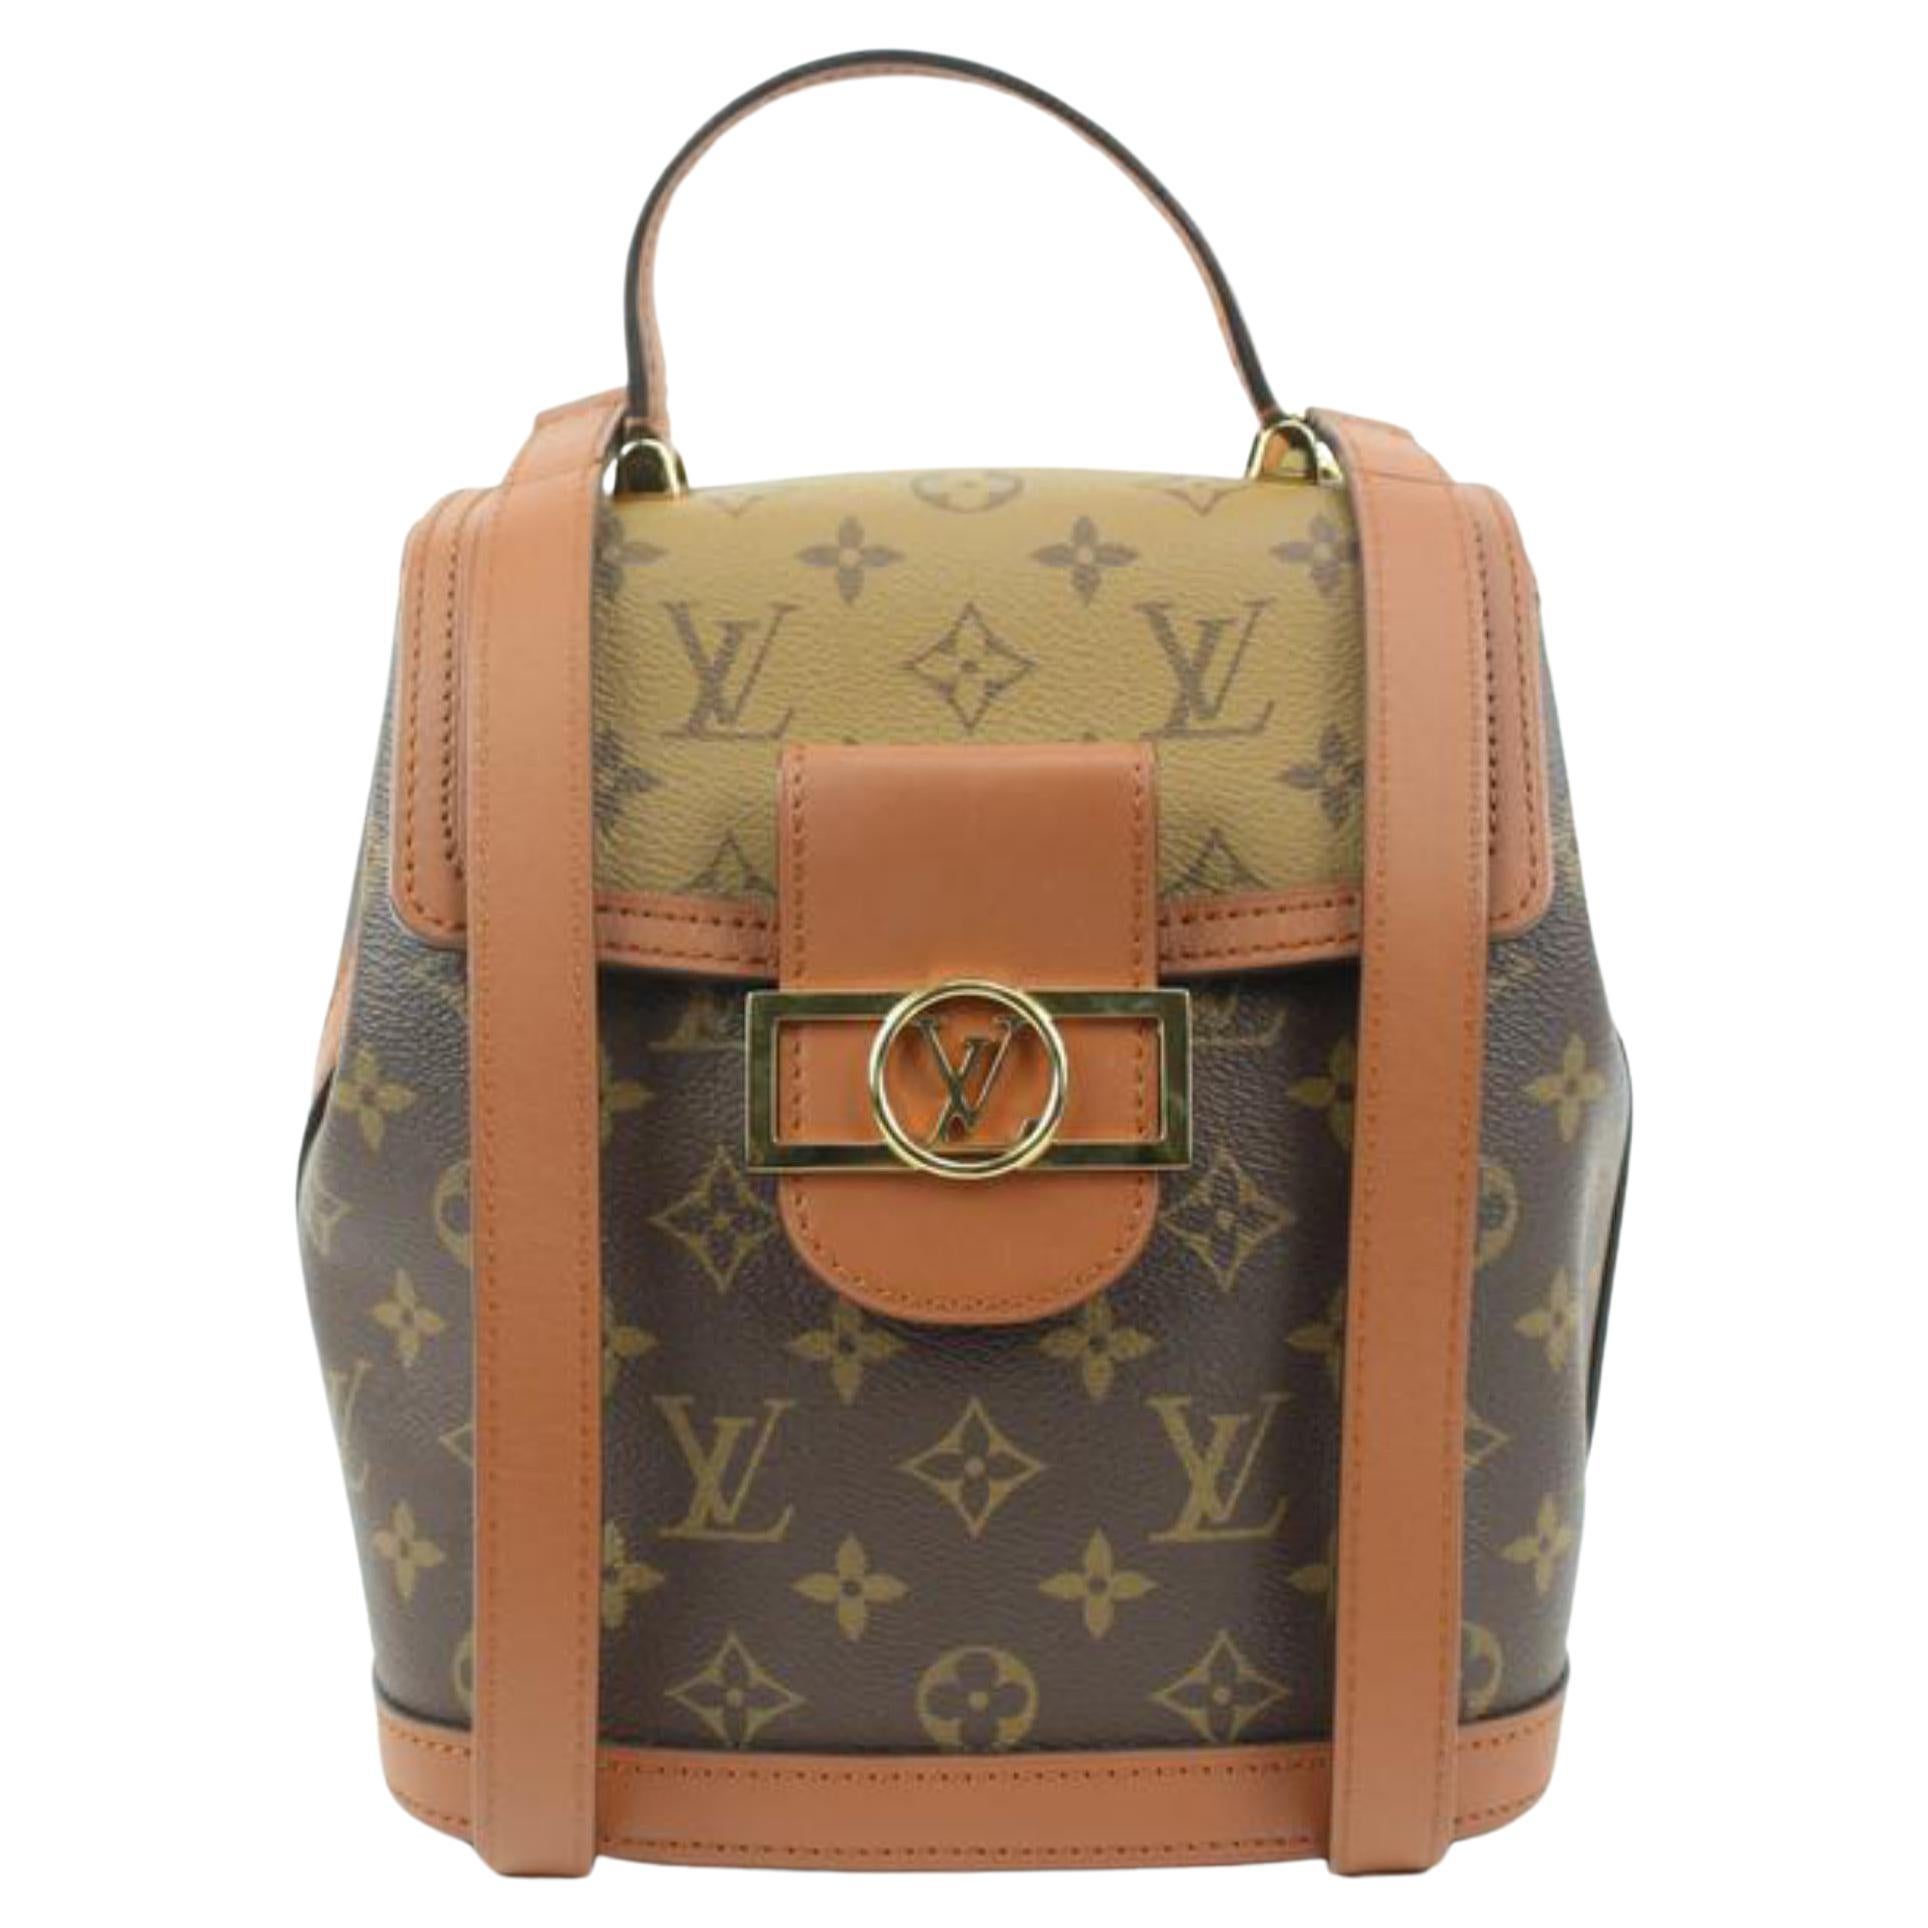 Louis Vuitton Dauphine Pm - For Sale on 1stDibs